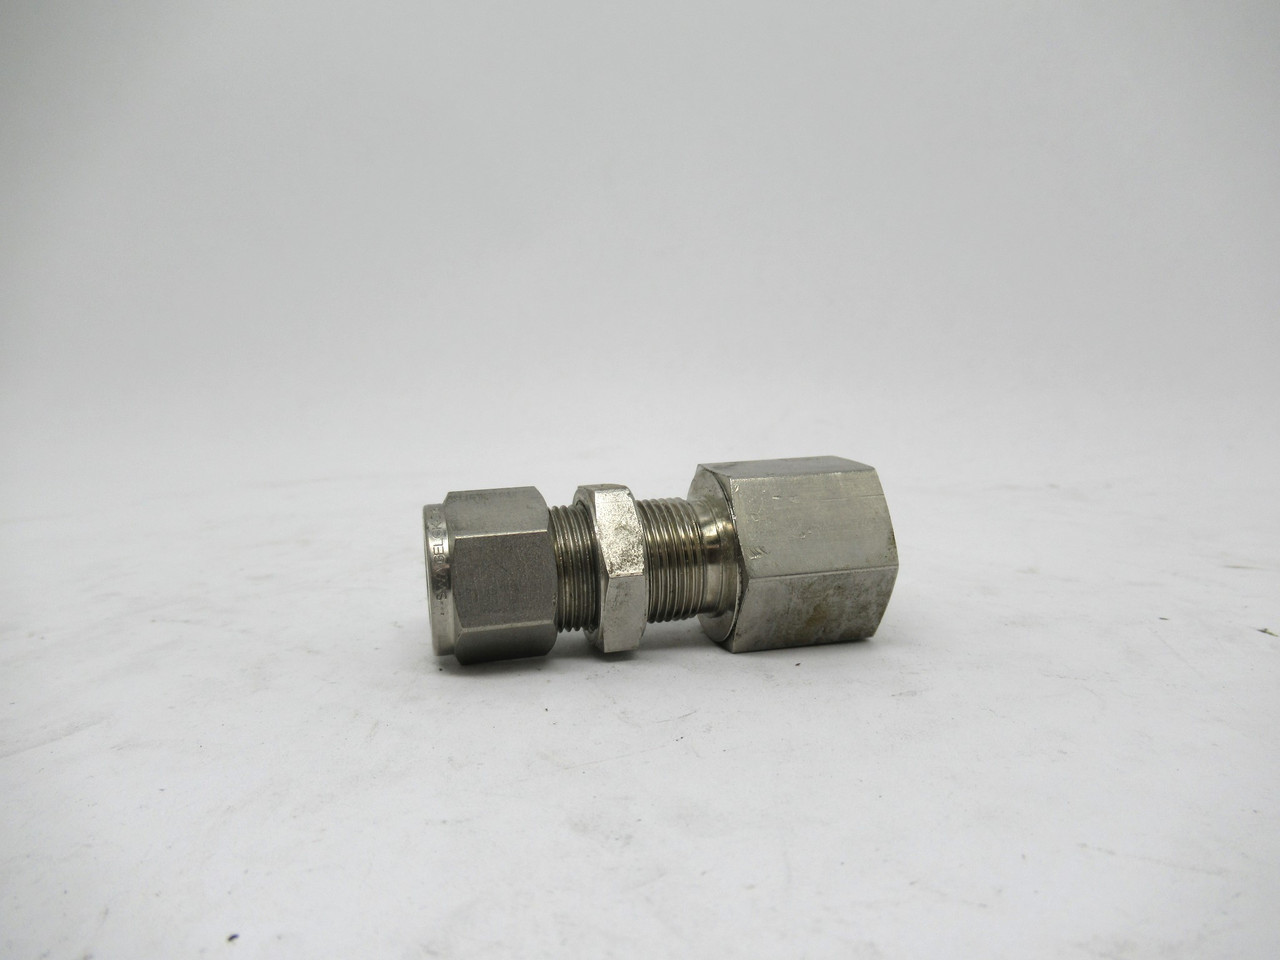 Swagelok SS-810-71-8 Tube Fitting Female Connector 1/2" Tube OD x 1/2" USED